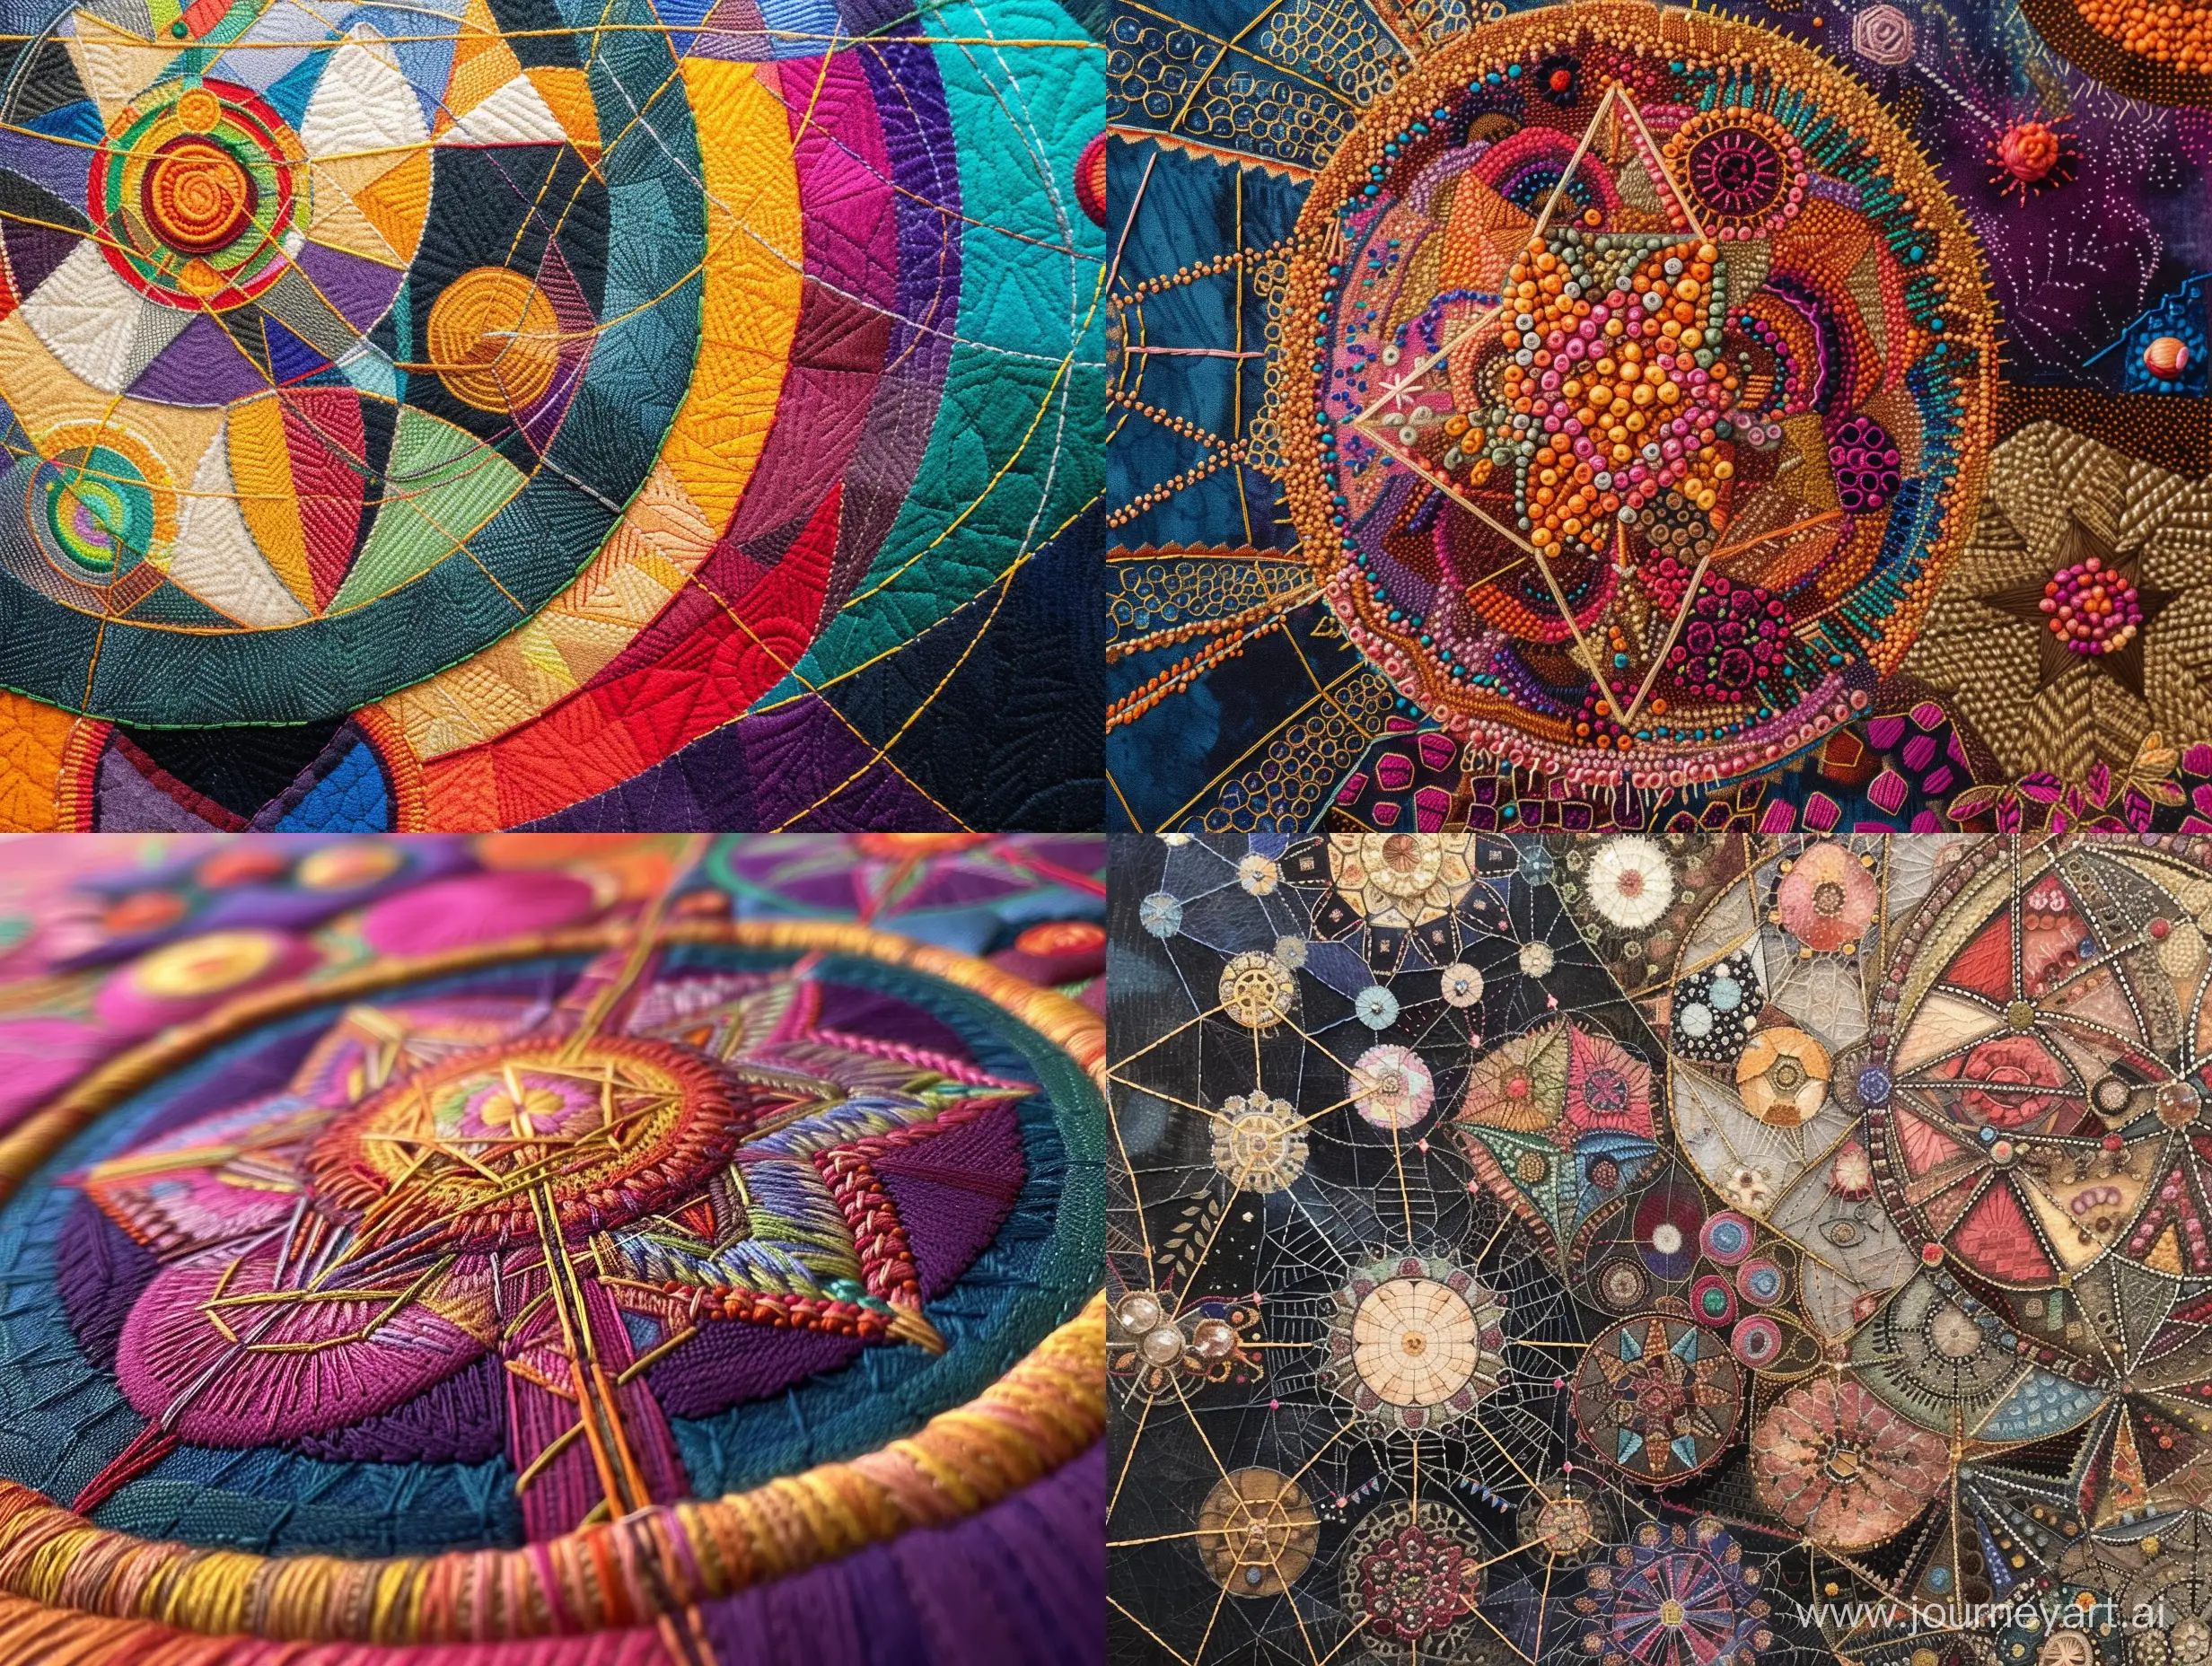 Metaphysical-Enlightenment-Unlocking-Multiple-Dimensions-in-Elaborate-Embroidery